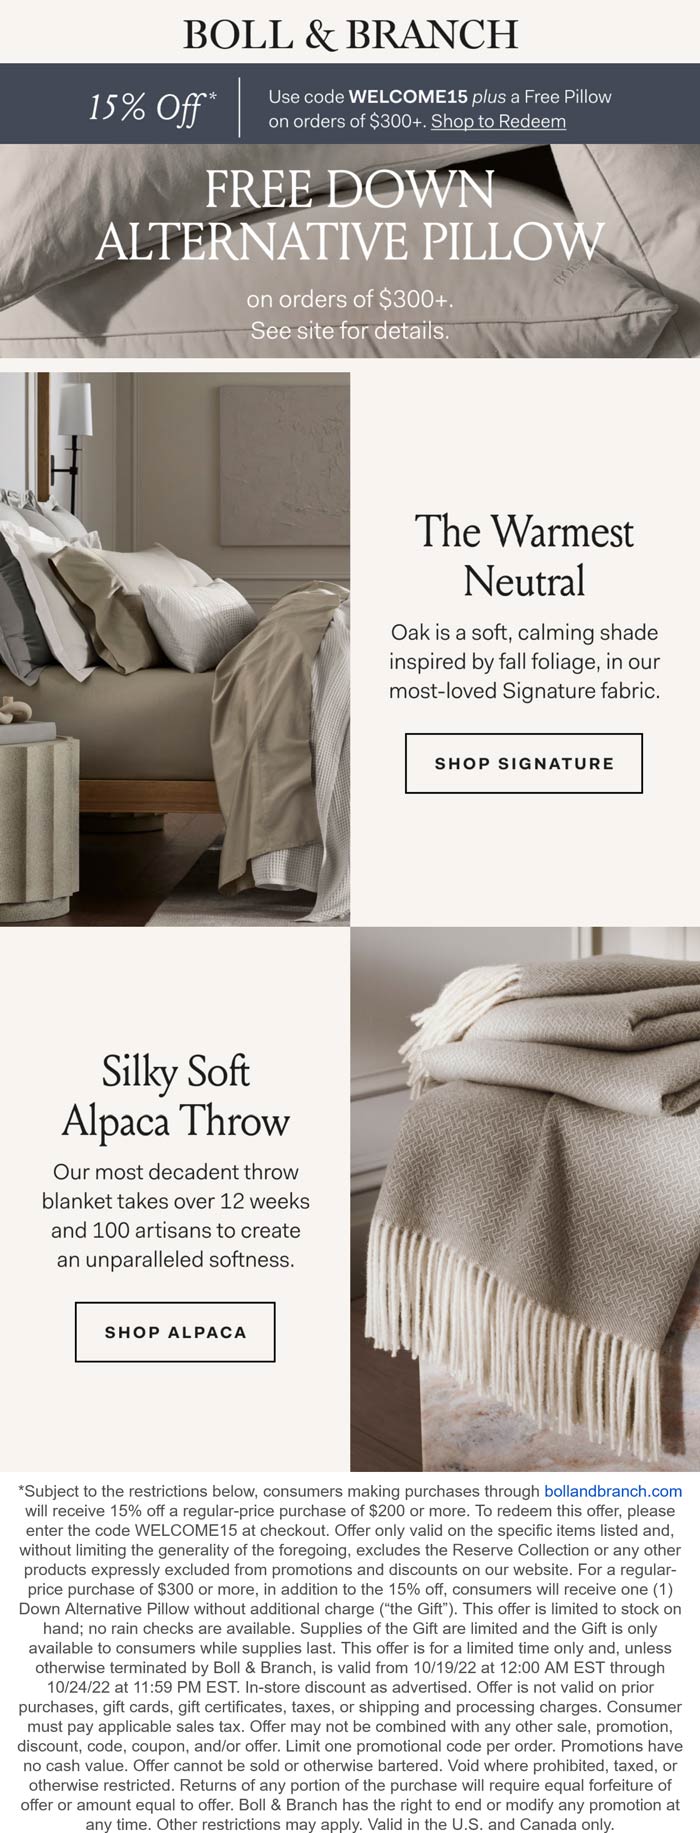 Boll & Branch stores Coupon  15% off + free pillow on $300 at Boll & Branch via promo code WELCOME15 #bollbranch 